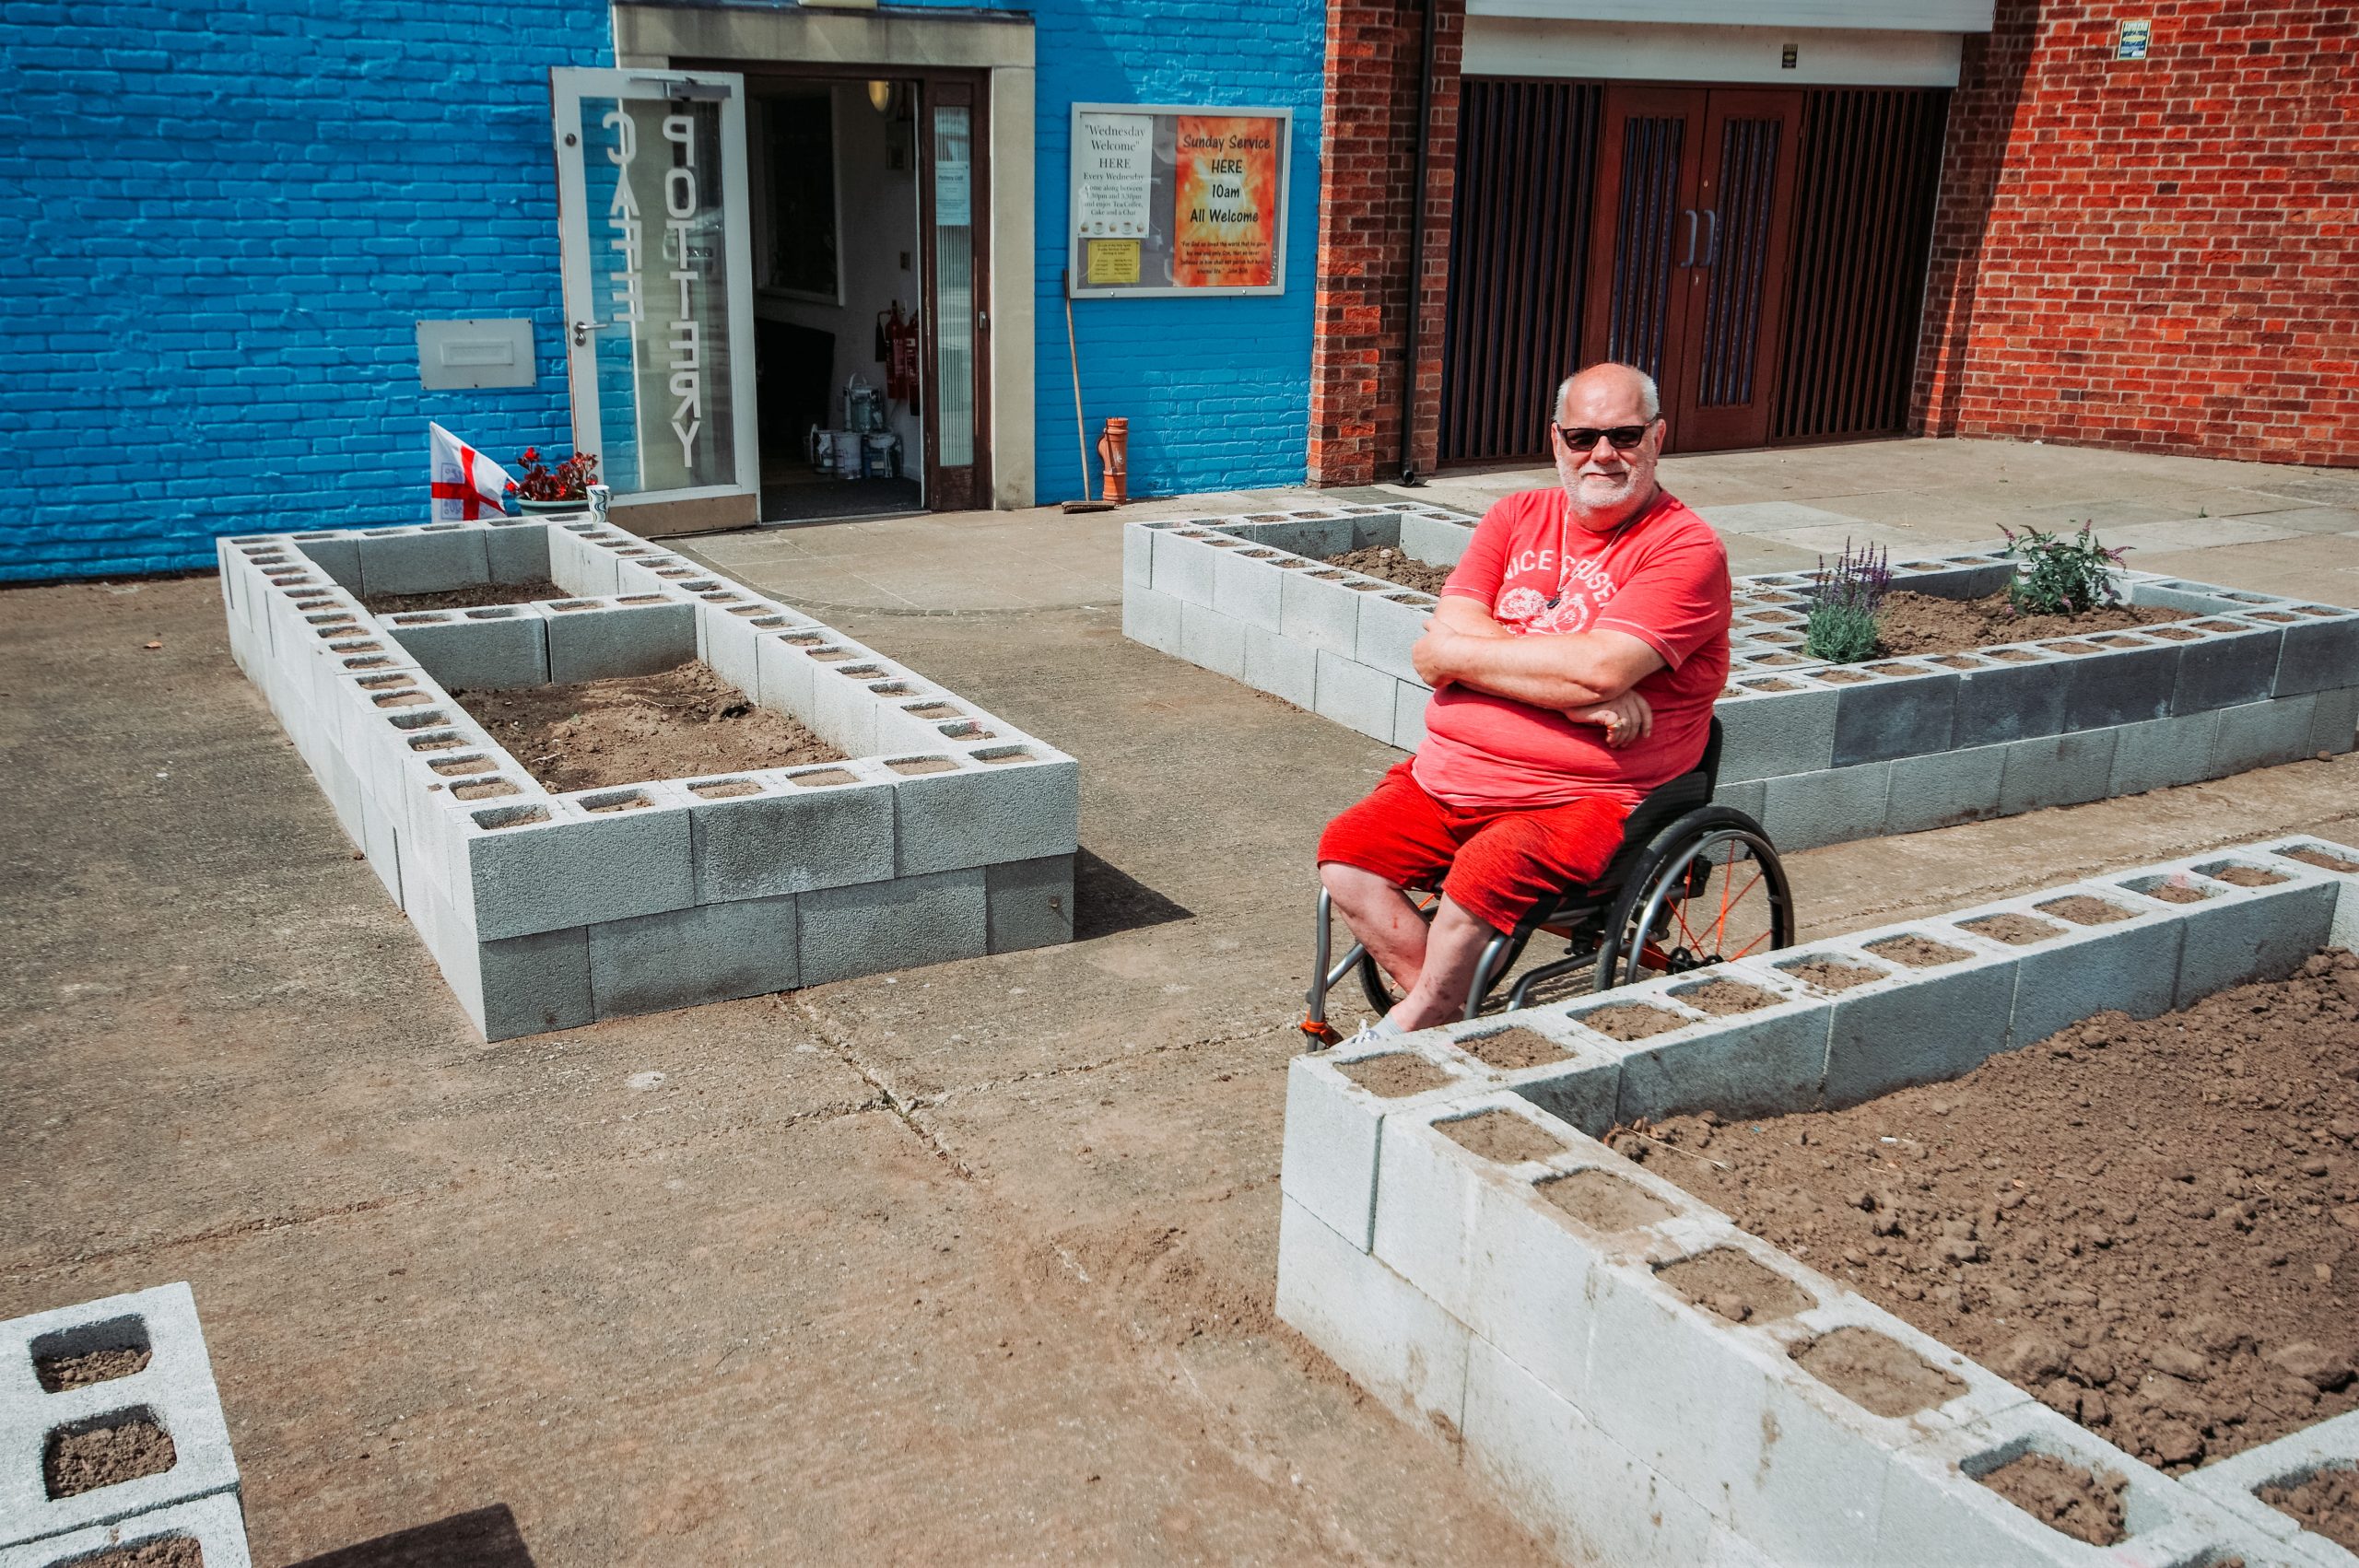 Sean is sat in his wheelchair surrounded by raised garden beds made of breezeblocks